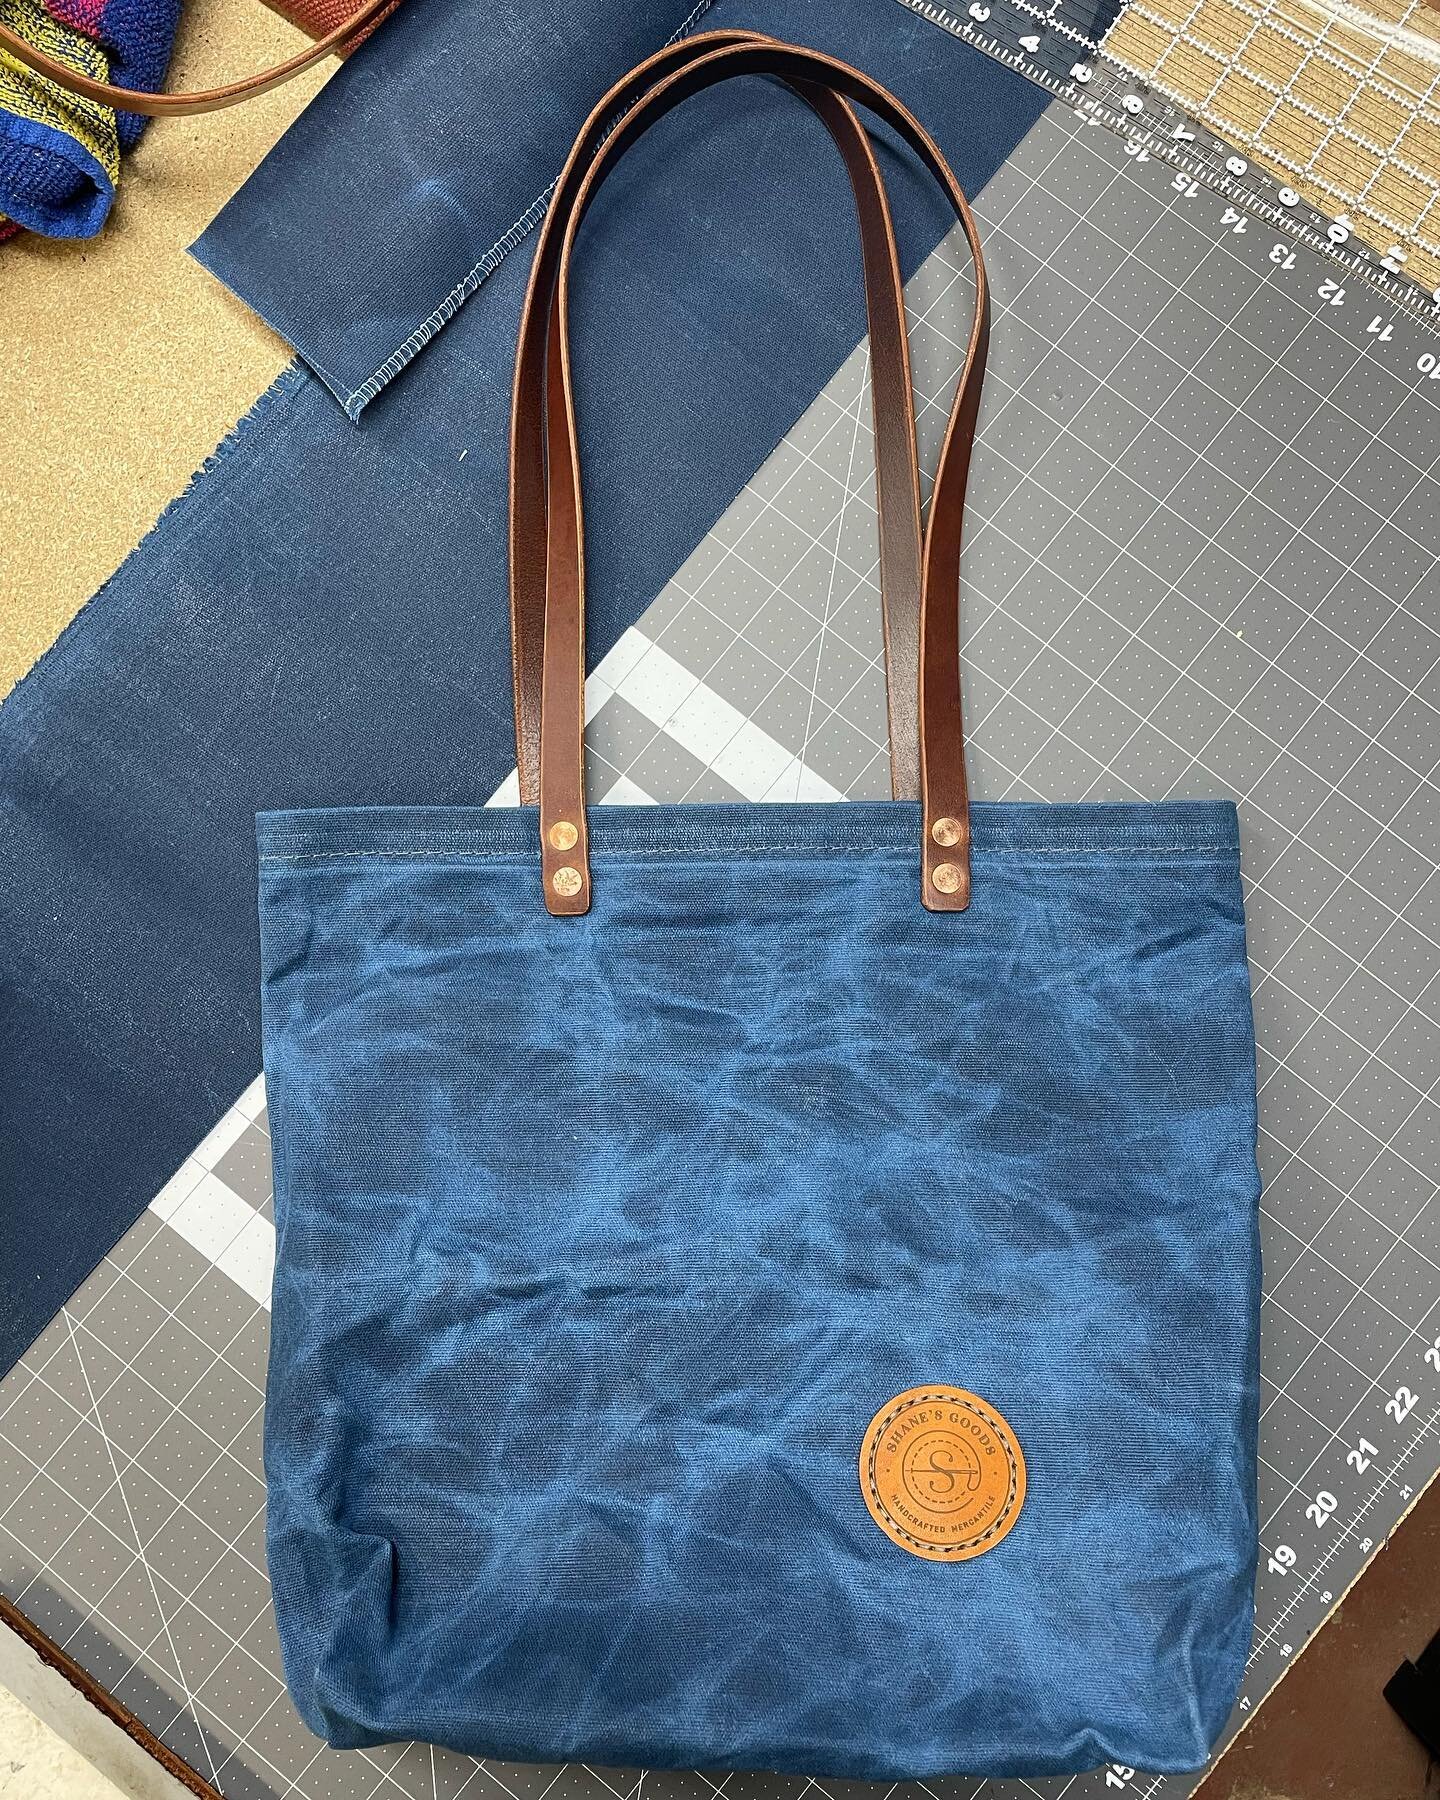 Shipping custom holiday orders this week. Here is a blue waxed canvas tote about to go out the door.